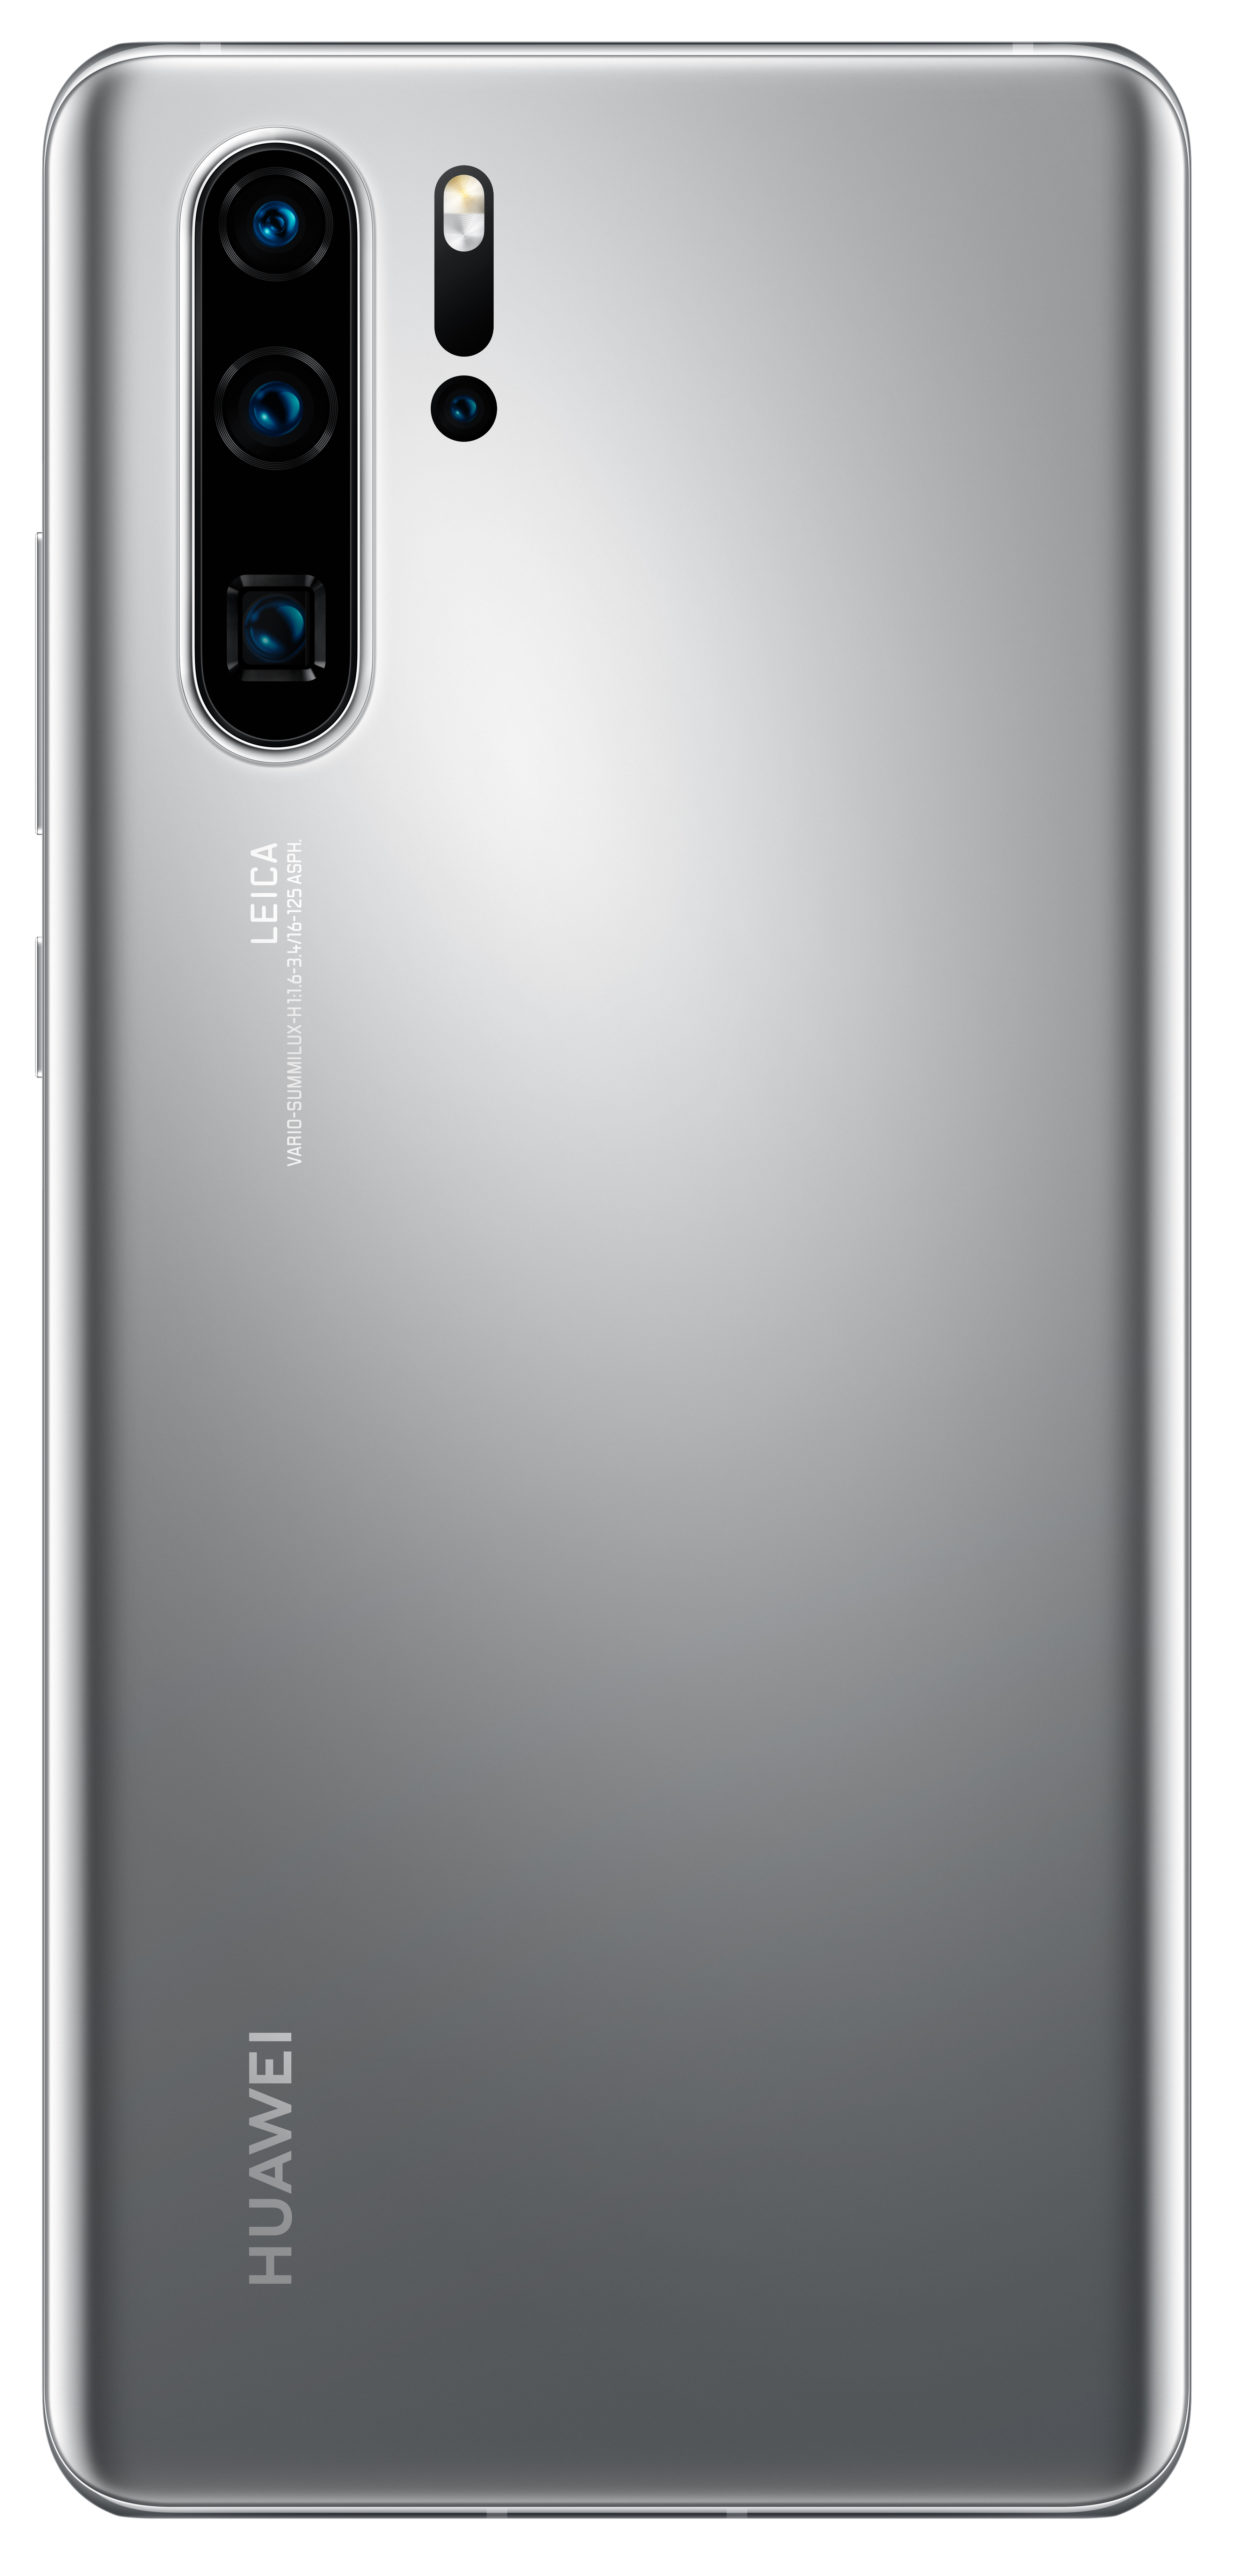 Huawei P30 Pro New Edition (Silver Frost) announced